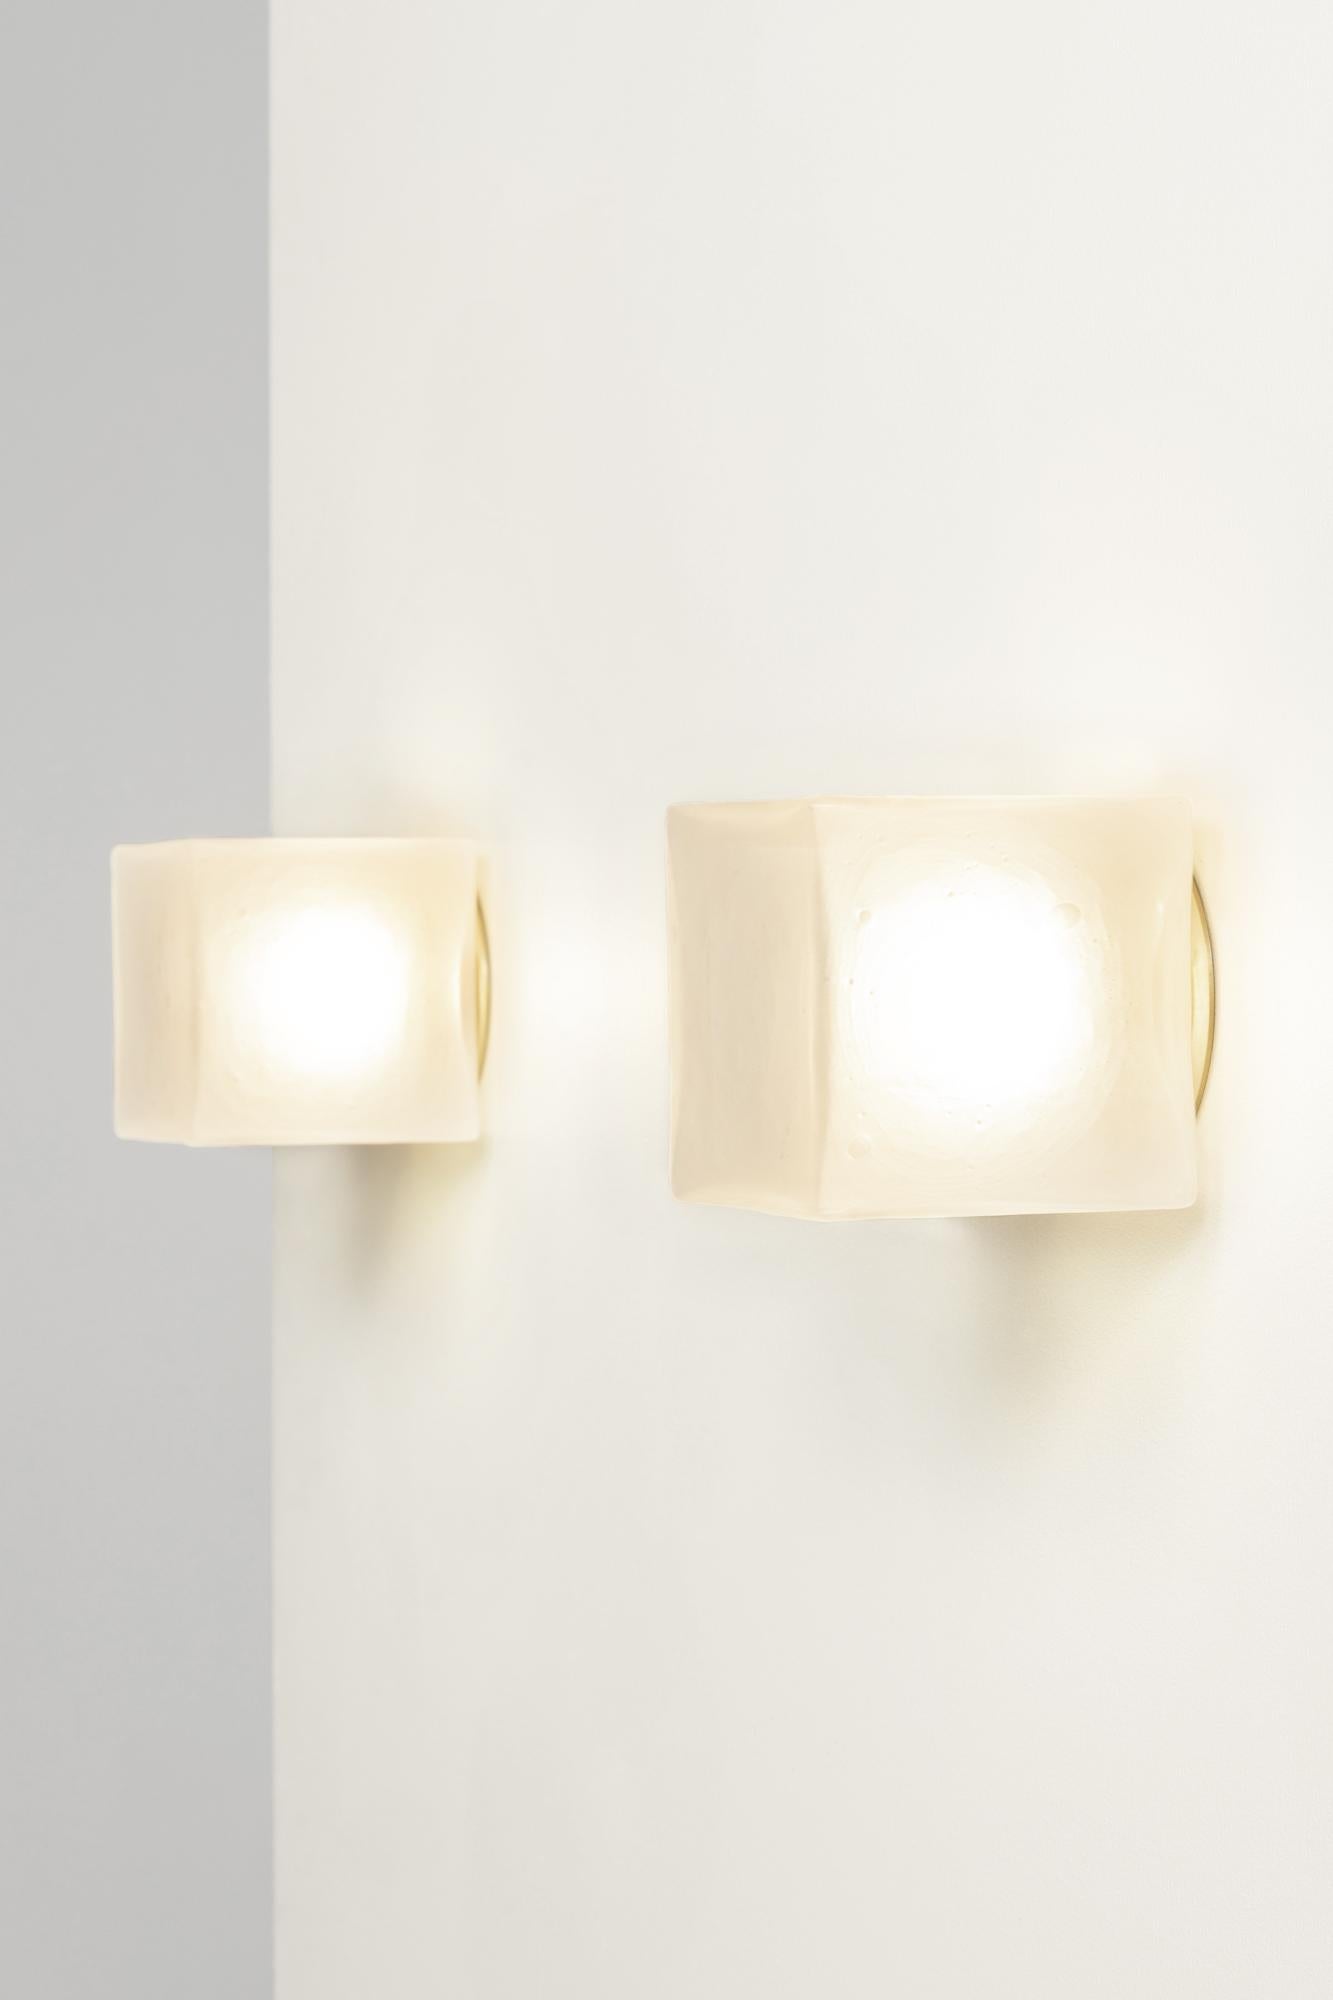 The Alice collection is inspired by brutalist modular architecture. The textured hand blown glass cubes are sandblasted to create a soft glow. Available in satin brass or matte black, and as a ceiling flush mount.

5 in (13 cm) W x 5 1/4 in (13.5